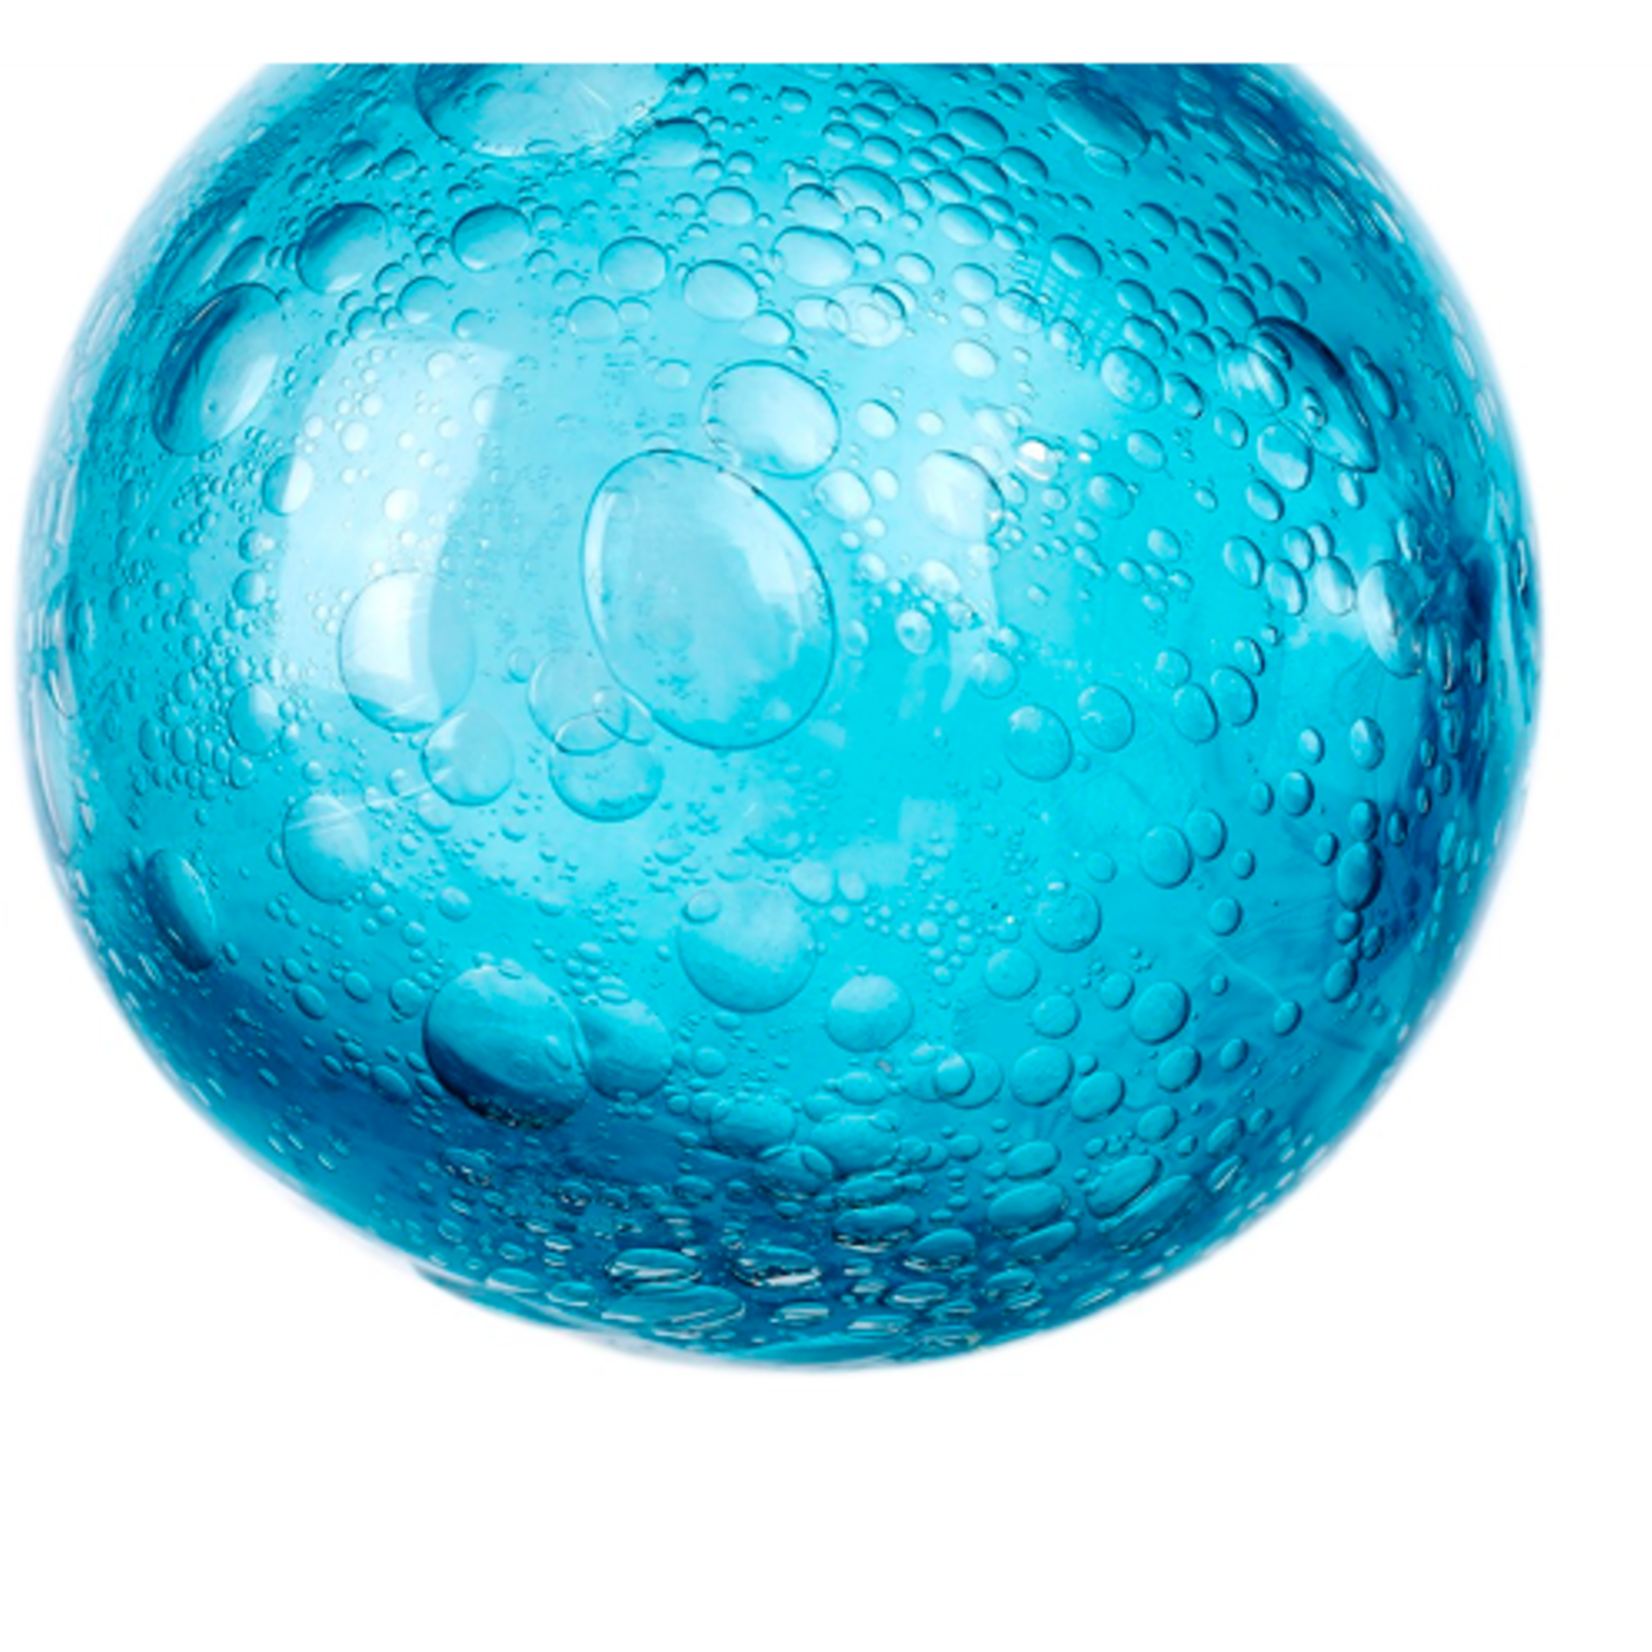 40% off was $8 now $4.79. 3”D BLUE DECORATIVE GLASS BALL SPHERE